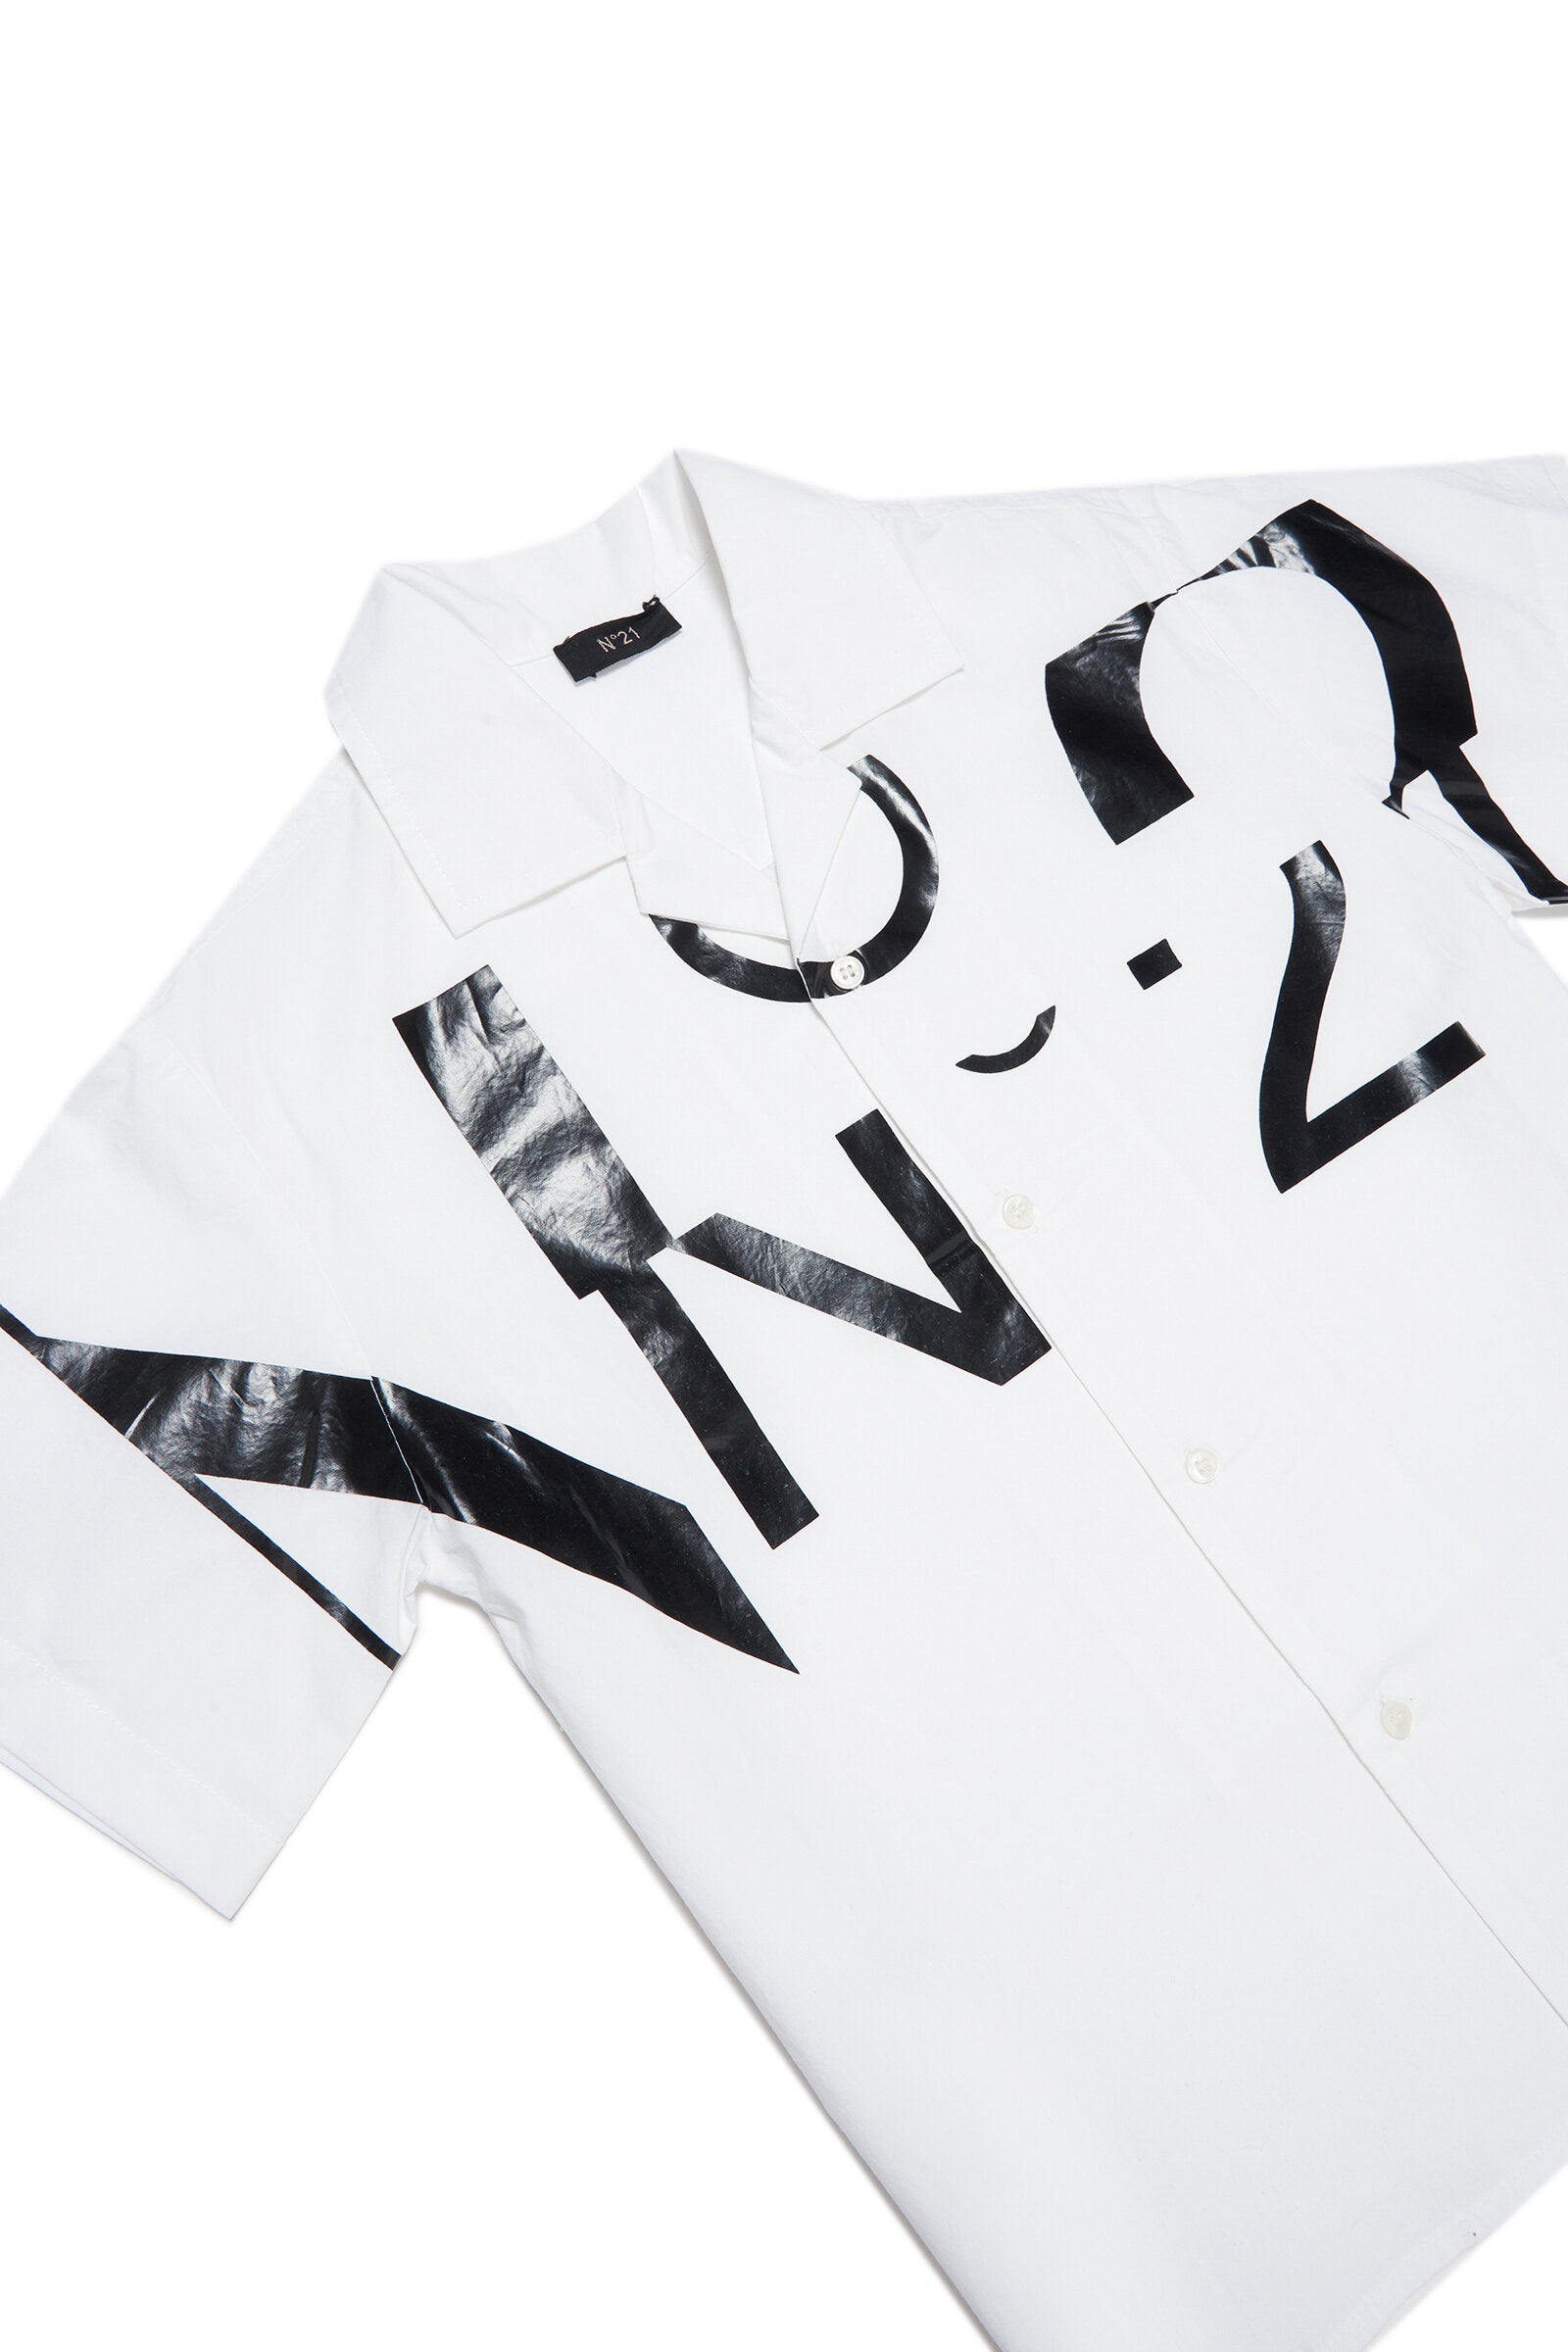 White poplin shirt with sectioned logo